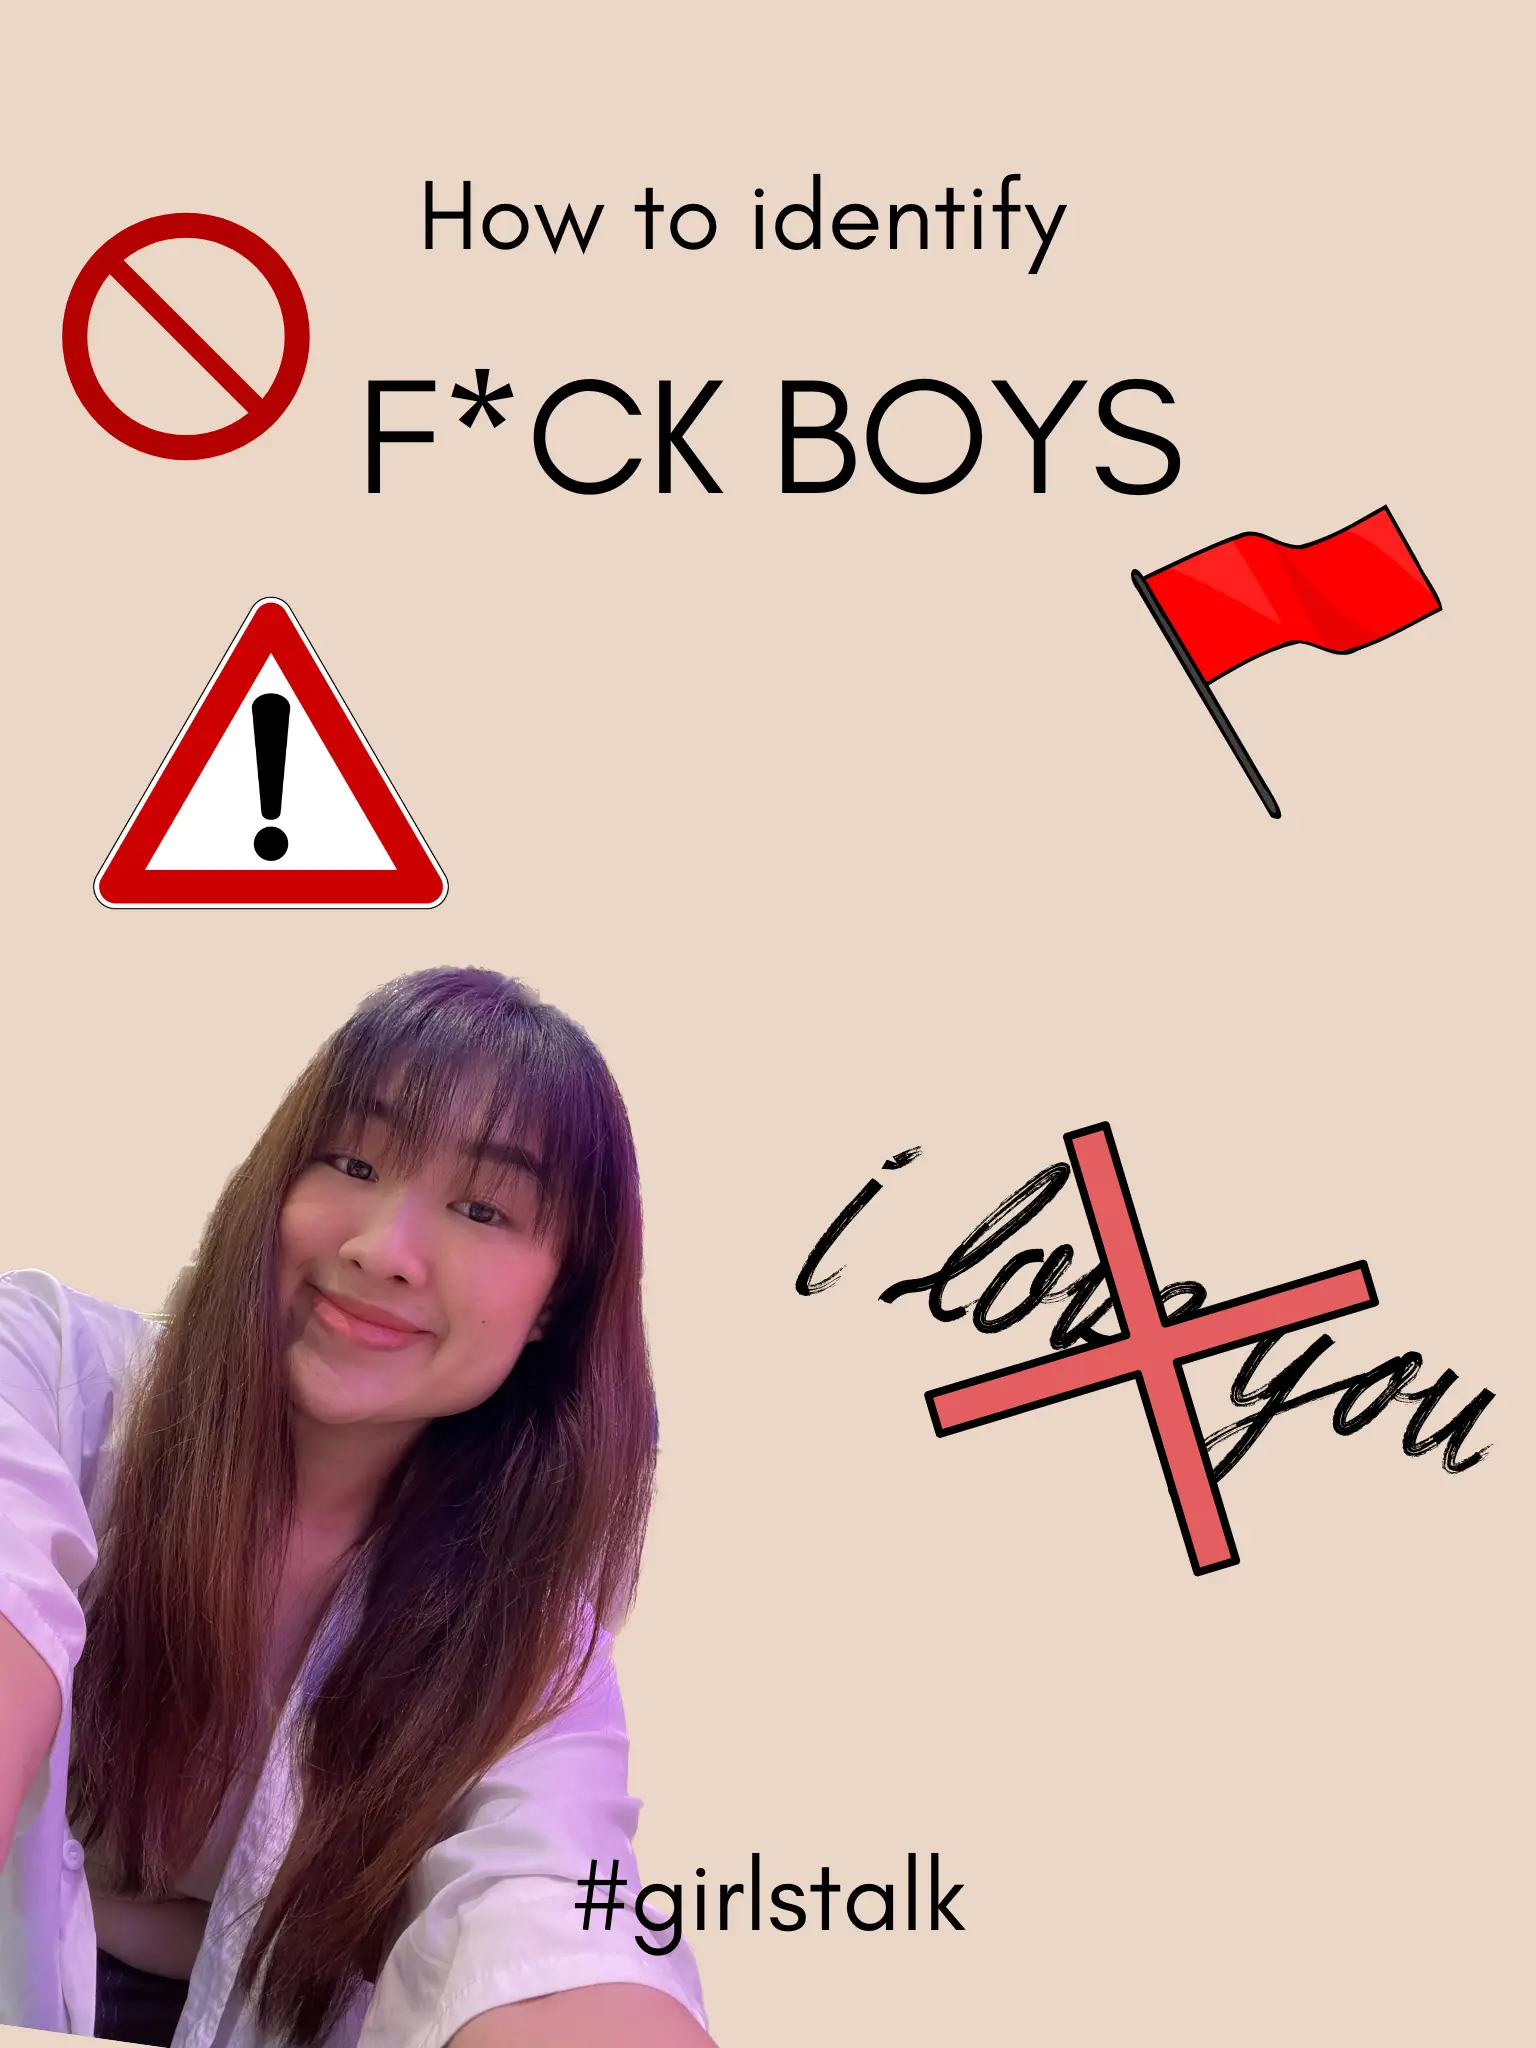 SAY NO TO F*CK BOYS ❌🚩💔😭's images